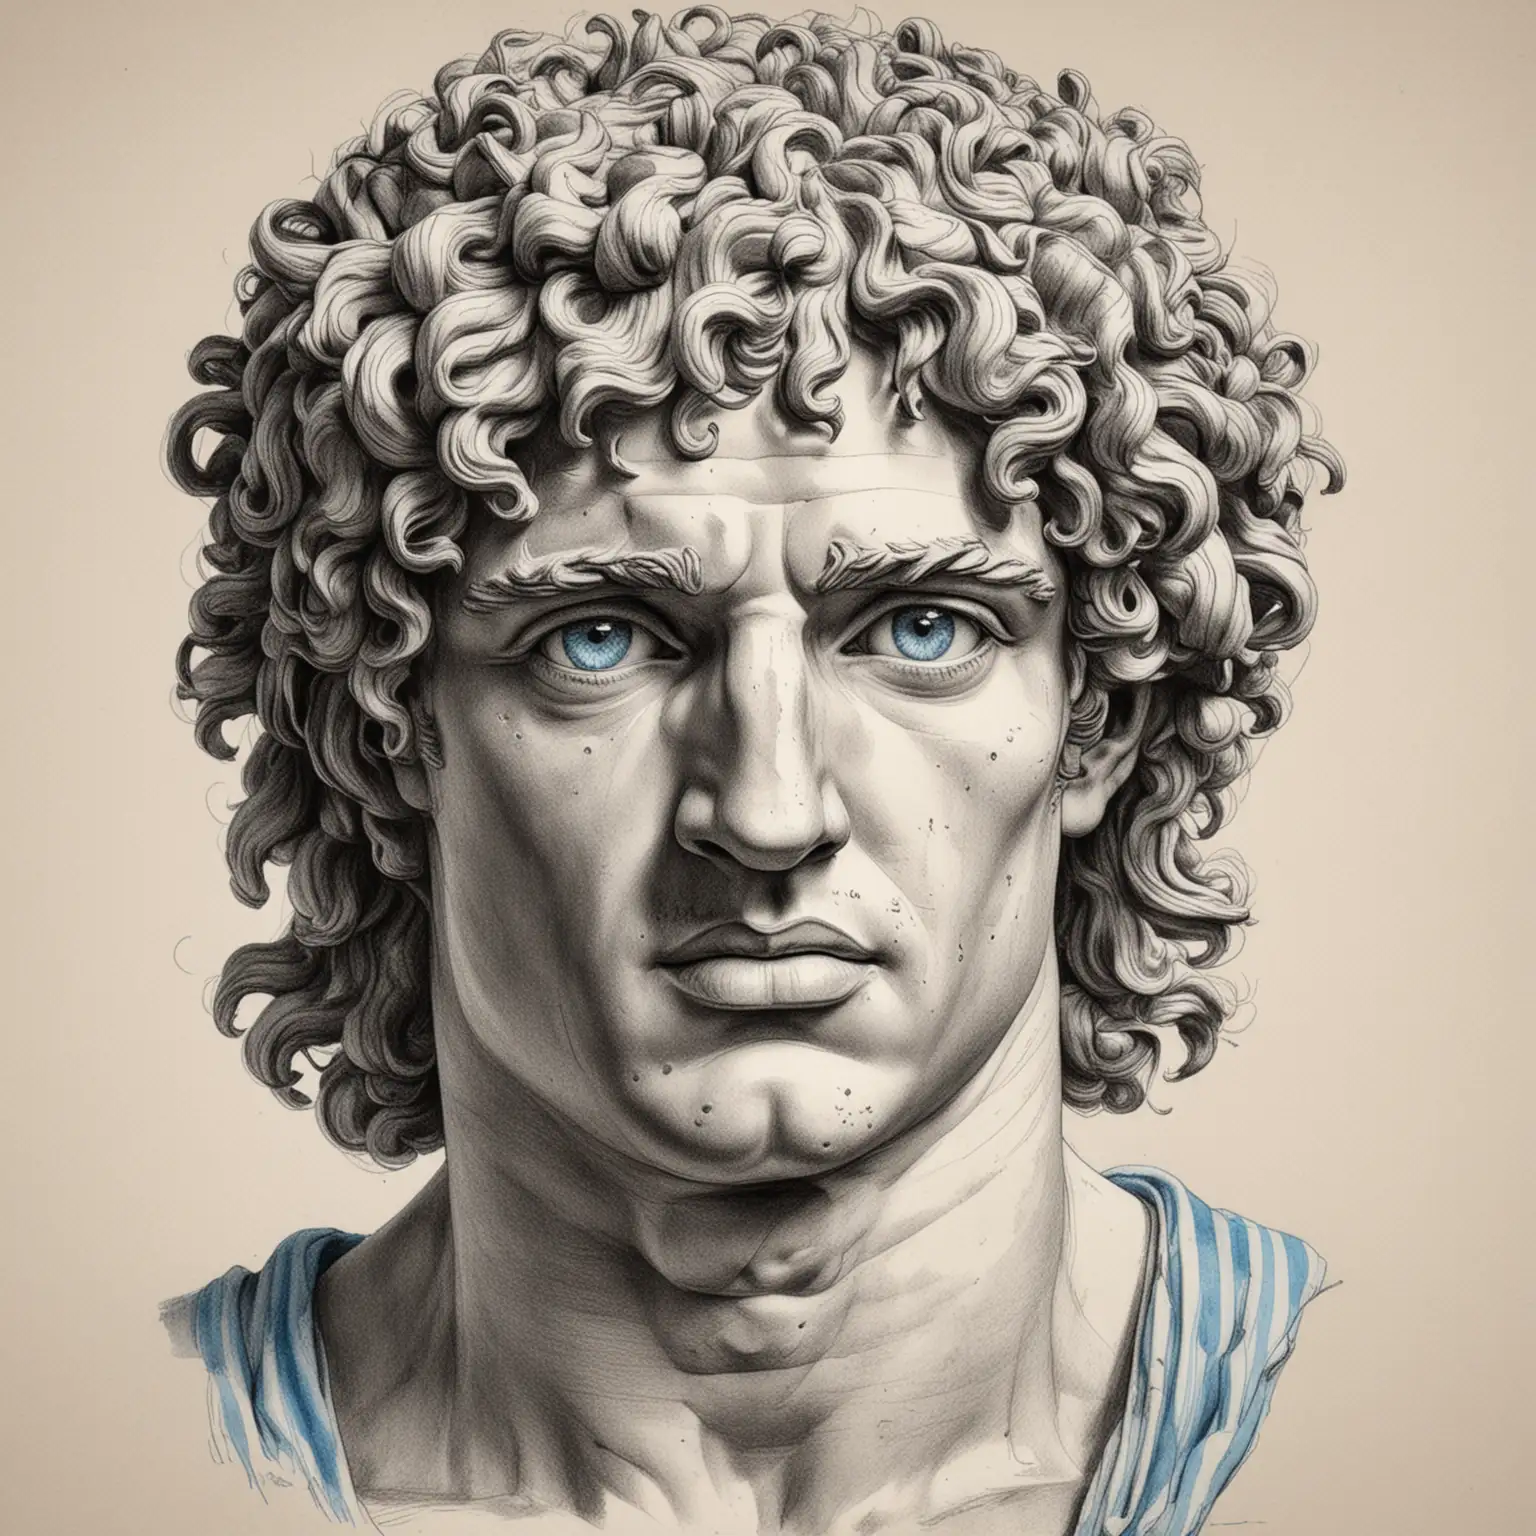 A pen and ink drawing of the headshot portrait from an ancient Greek statue, the subject is Alexander The Great with curly hair. His eyes have a look that is hard to gaze straight ahead, but instead he has his gaze directed slightly down left. He wears a white tunic with light blue stripes on it. This style will give your illustration a classic feel reminiscent of historical illustrations drawn in the style of hand in woodprints or engraving. It is simple, elegant, and timeless.